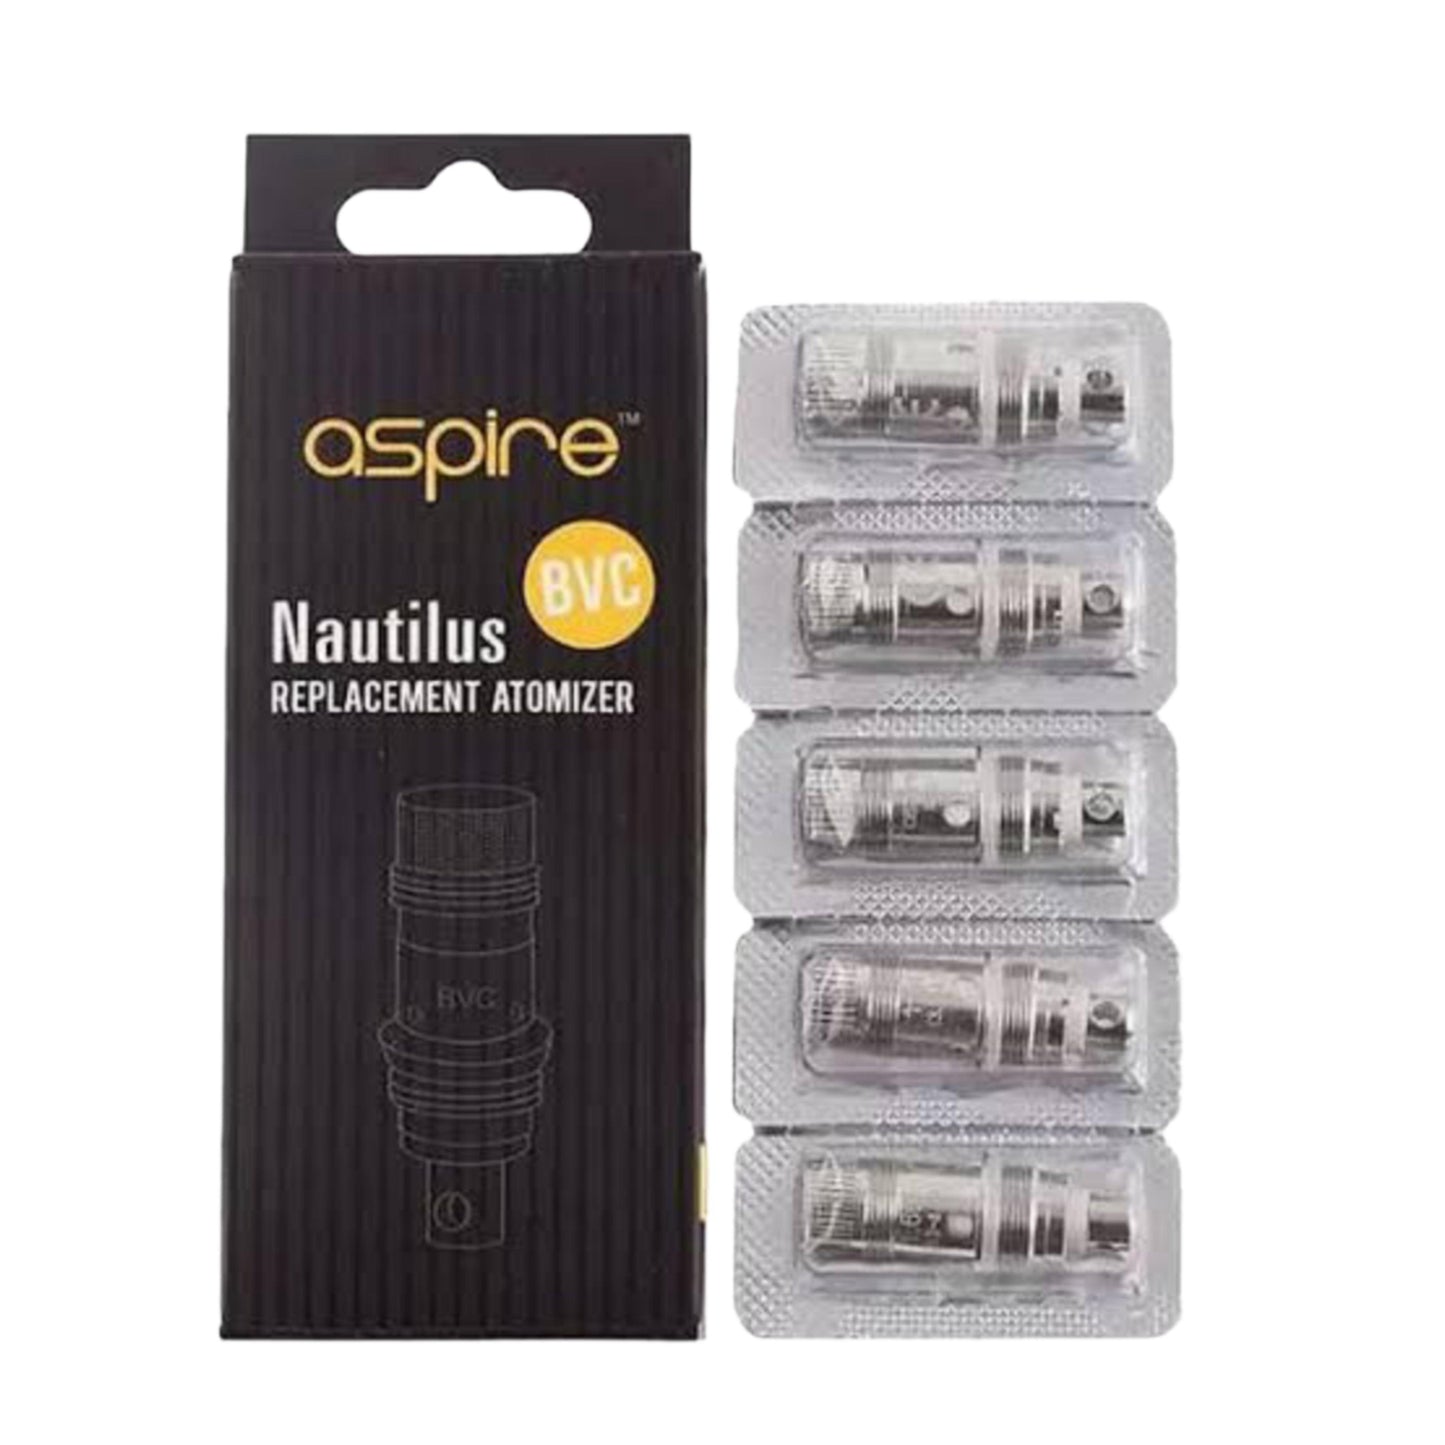 ASPIRE BVC COILS| Great Deal Today - Advanced Vapes